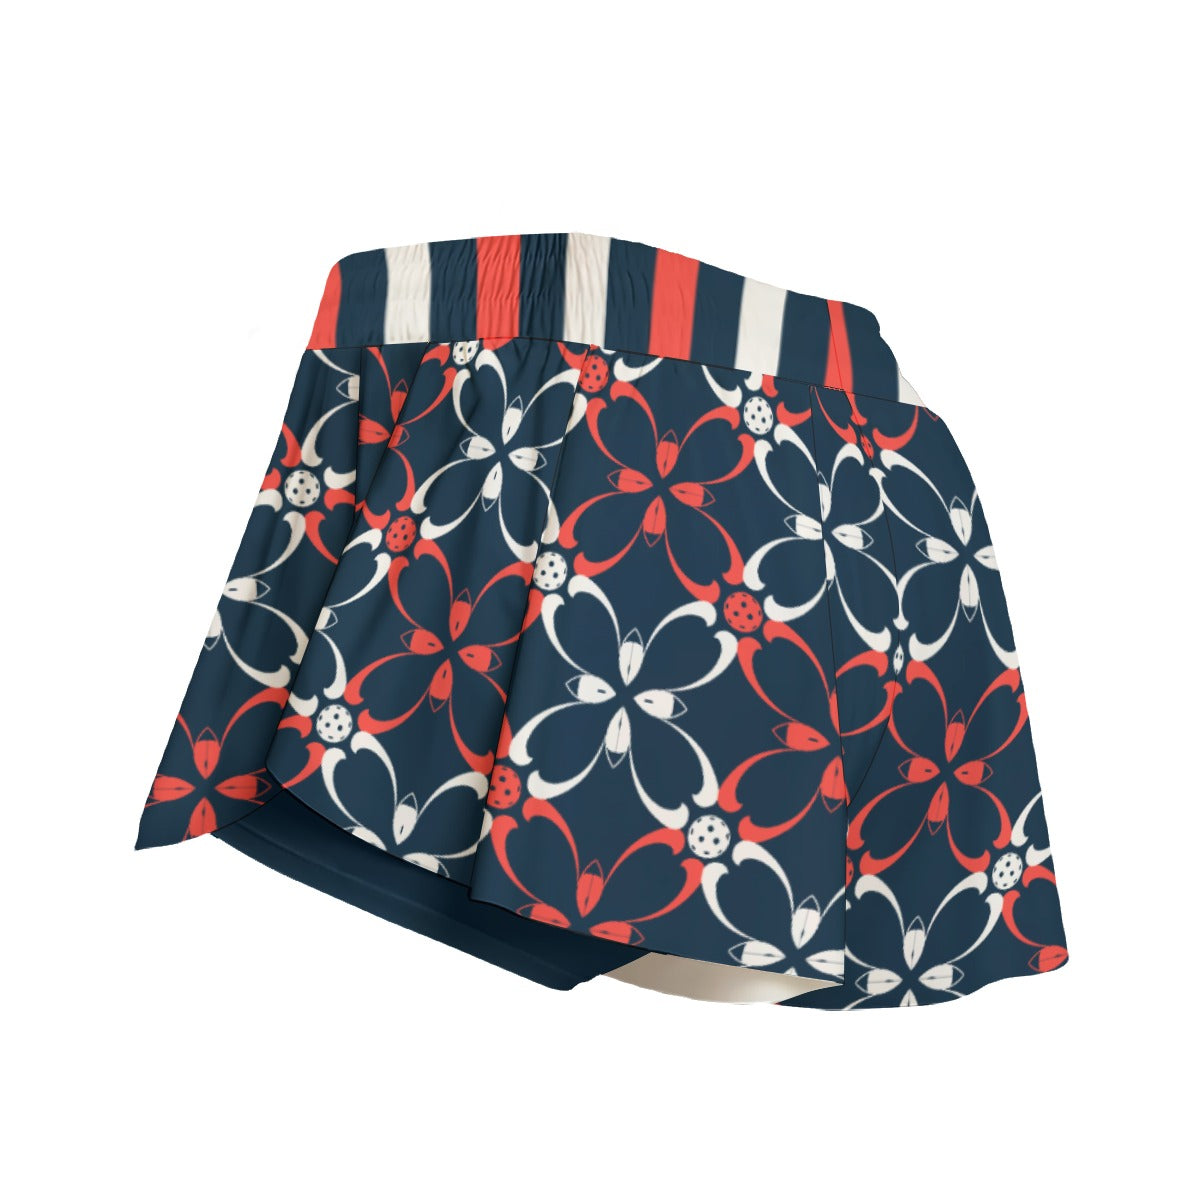 Van - Navy Blue - Petals - Pickleball Women's Sport Culottes with Pockets by Dizzy Pickle